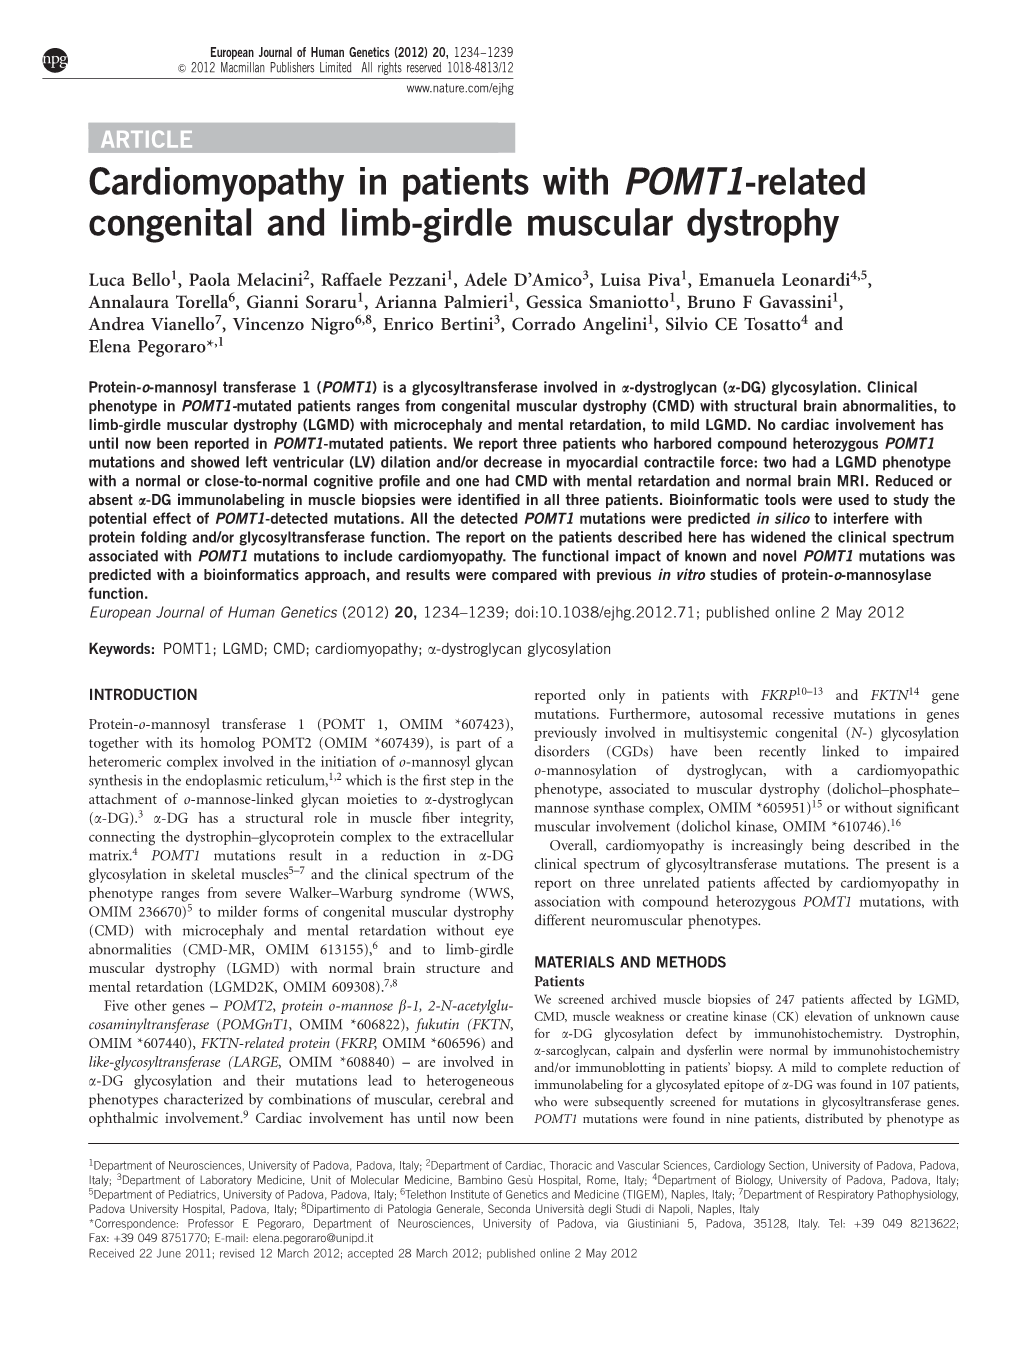 Cardiomyopathy in Patients with POMT1-Related Congenital and Limb-Girdle Muscular Dystrophy